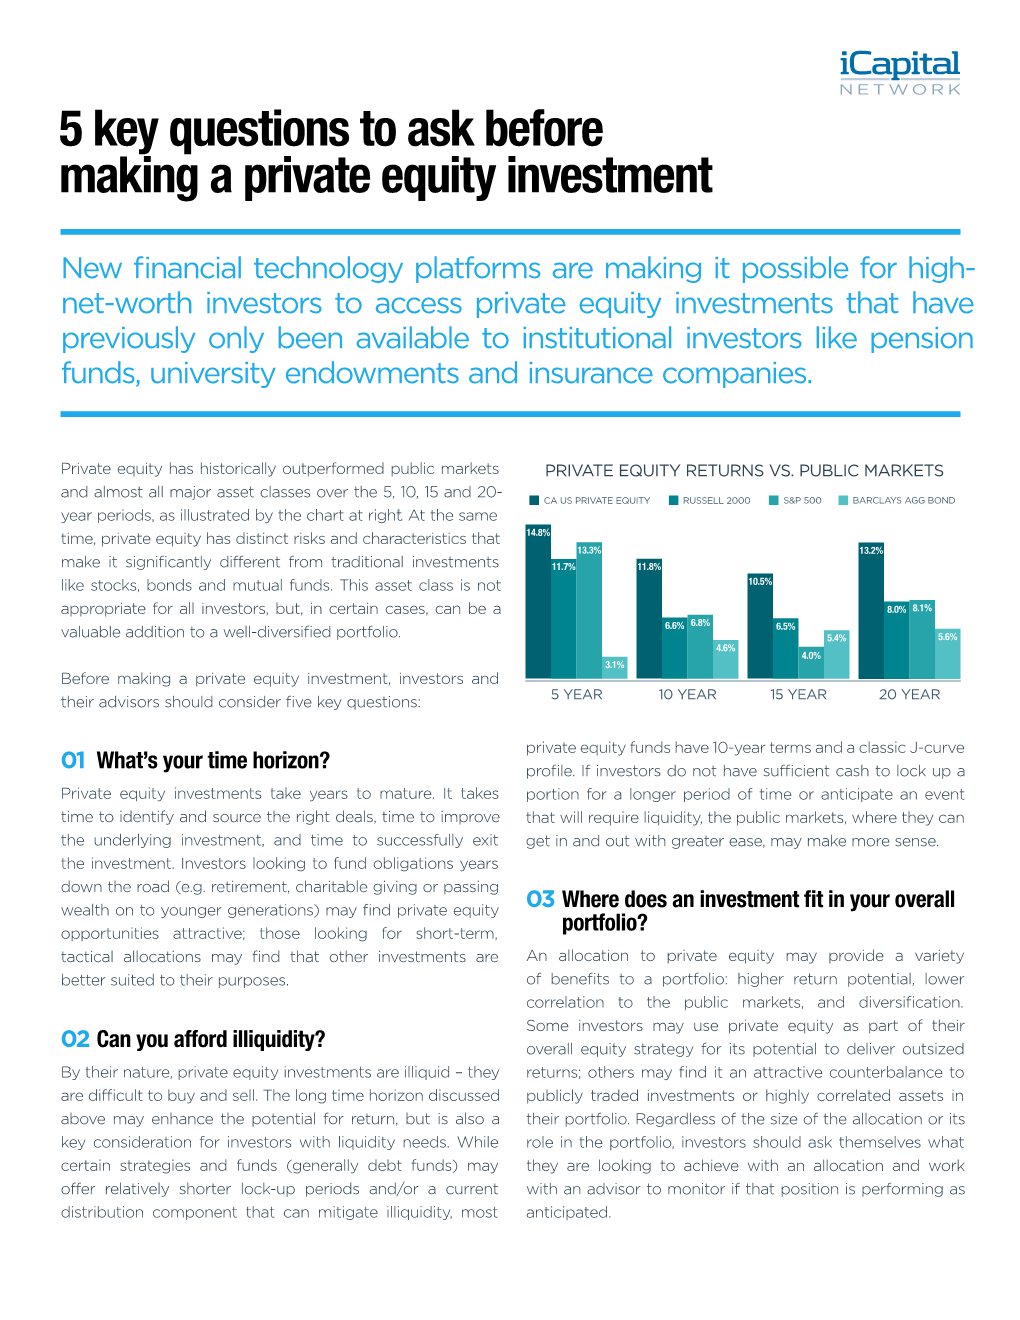 5 Key Questions to Ask Before Making a Private Equity Investment